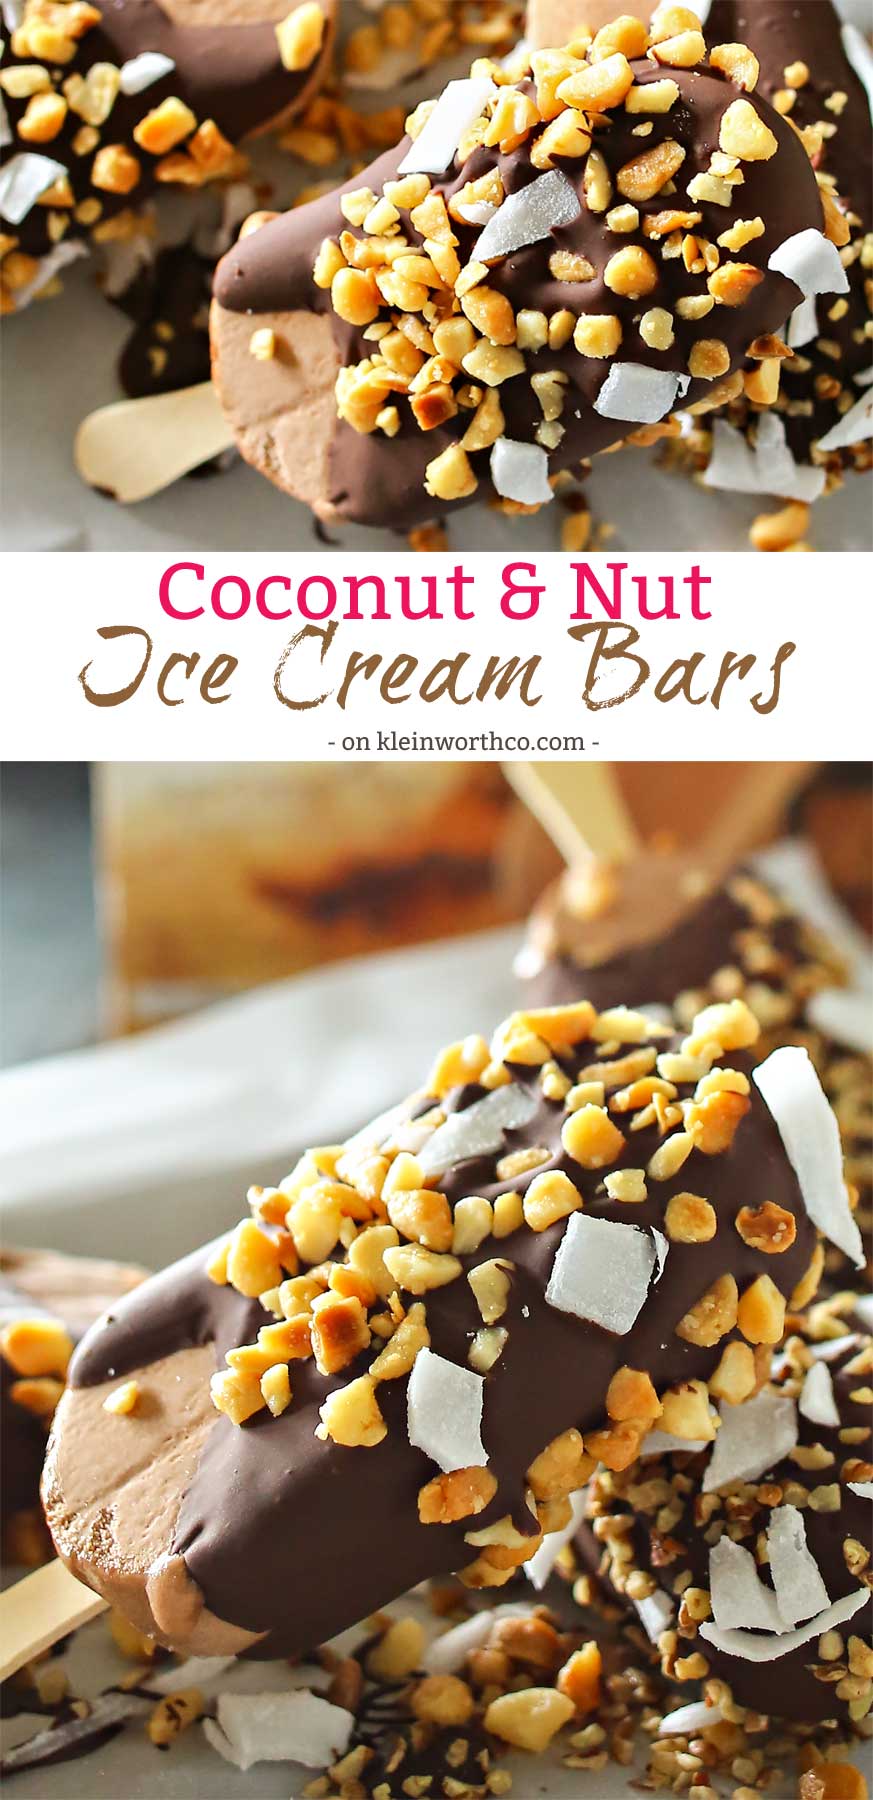 Coconut Nut Ice Cream Bars are the perfect little cool down on a hot summer day. Just a handful of ingredients & a few minutes is all you need. Chocolate ice cream coated with a thick layer of milk chocolate & coated with coconut & macadamia nuts is just heaven.